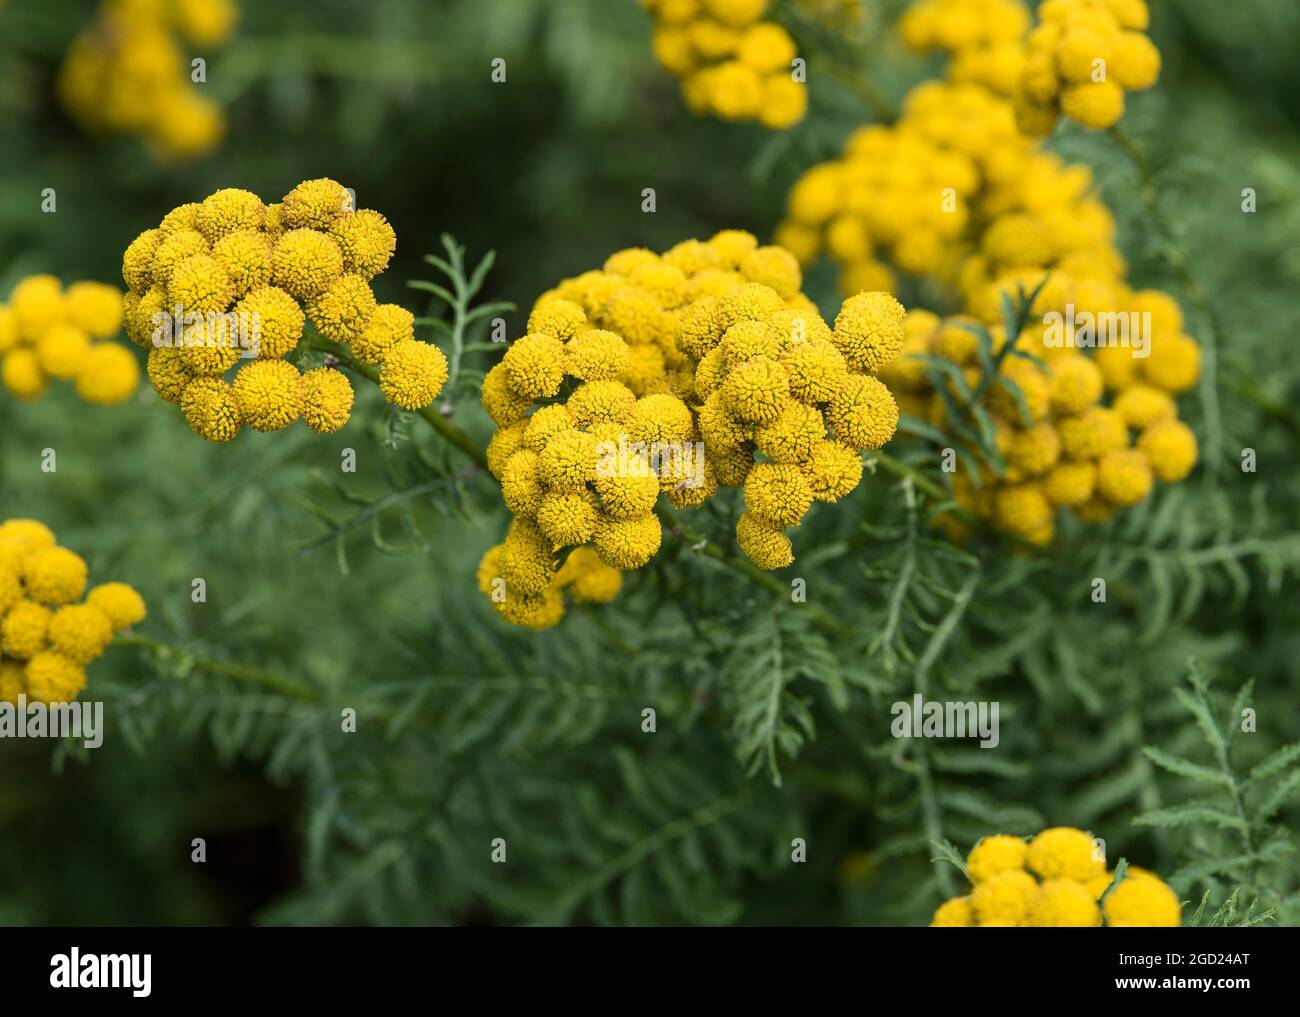 Tansy flower - Tanacetum vulgare is a medicinal herb with clusters of bright yellow flowers. Edible in small quantities. Stock Photo